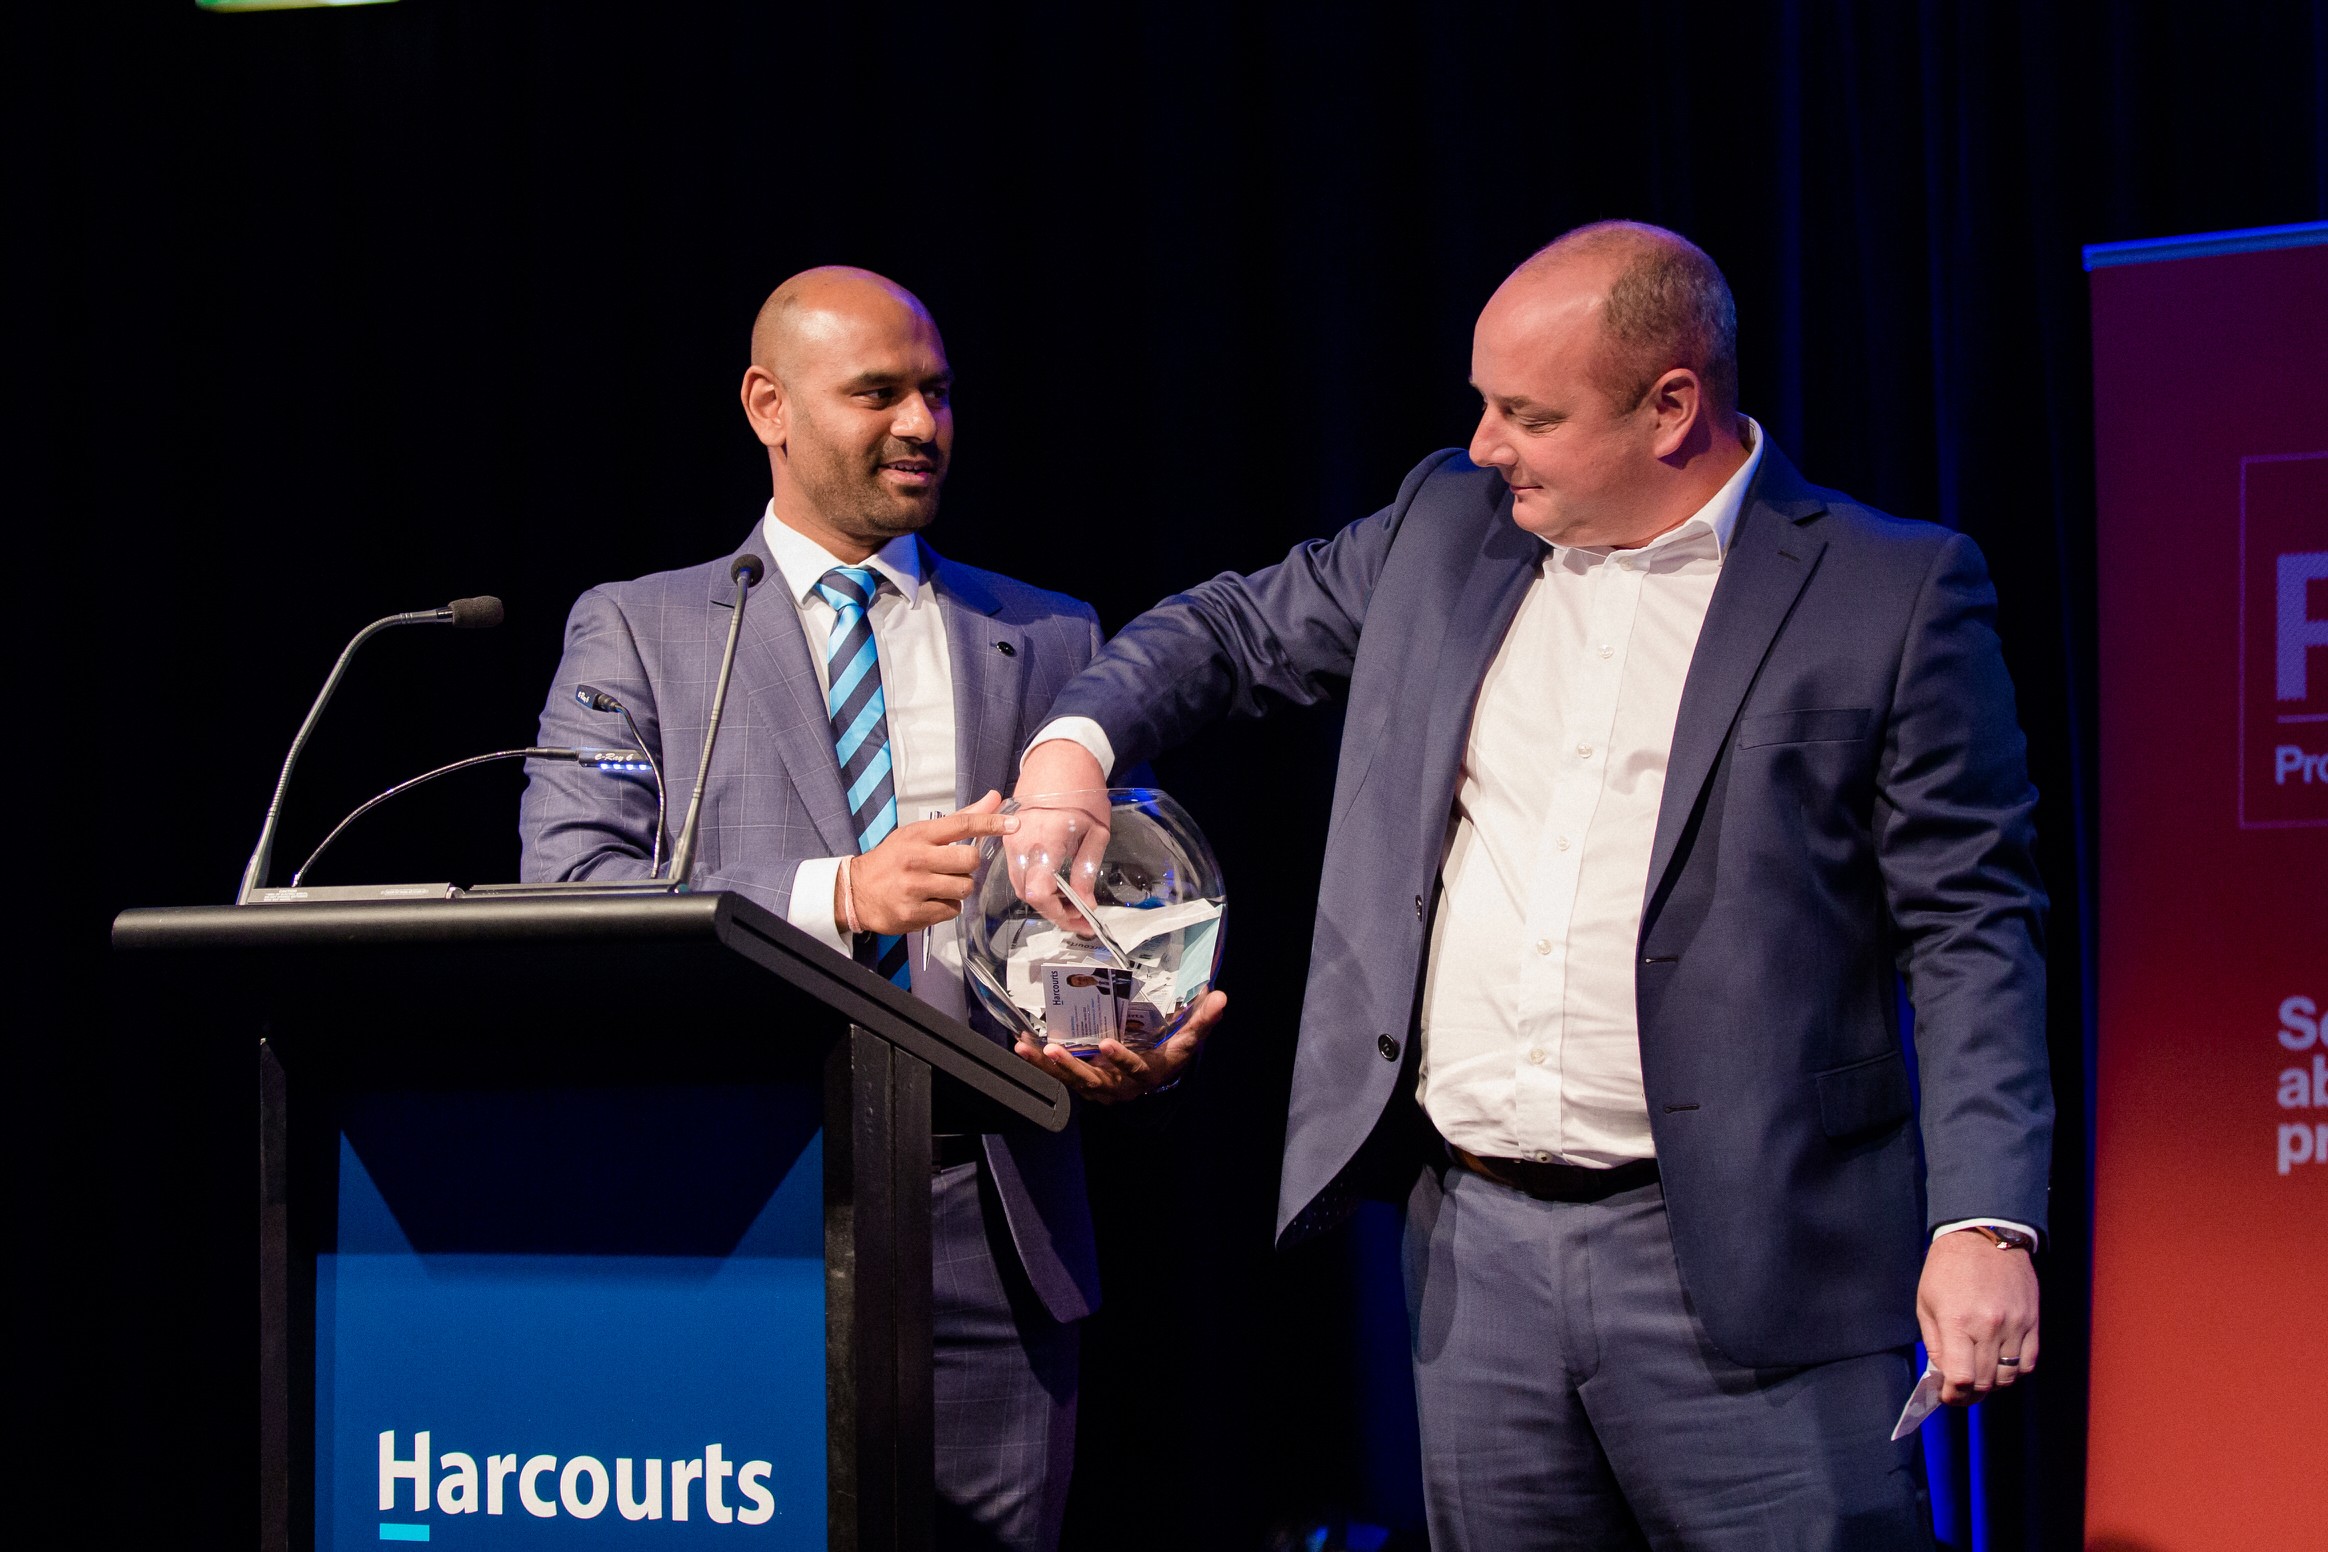 awards harcourts, gala, dinner event, auckland